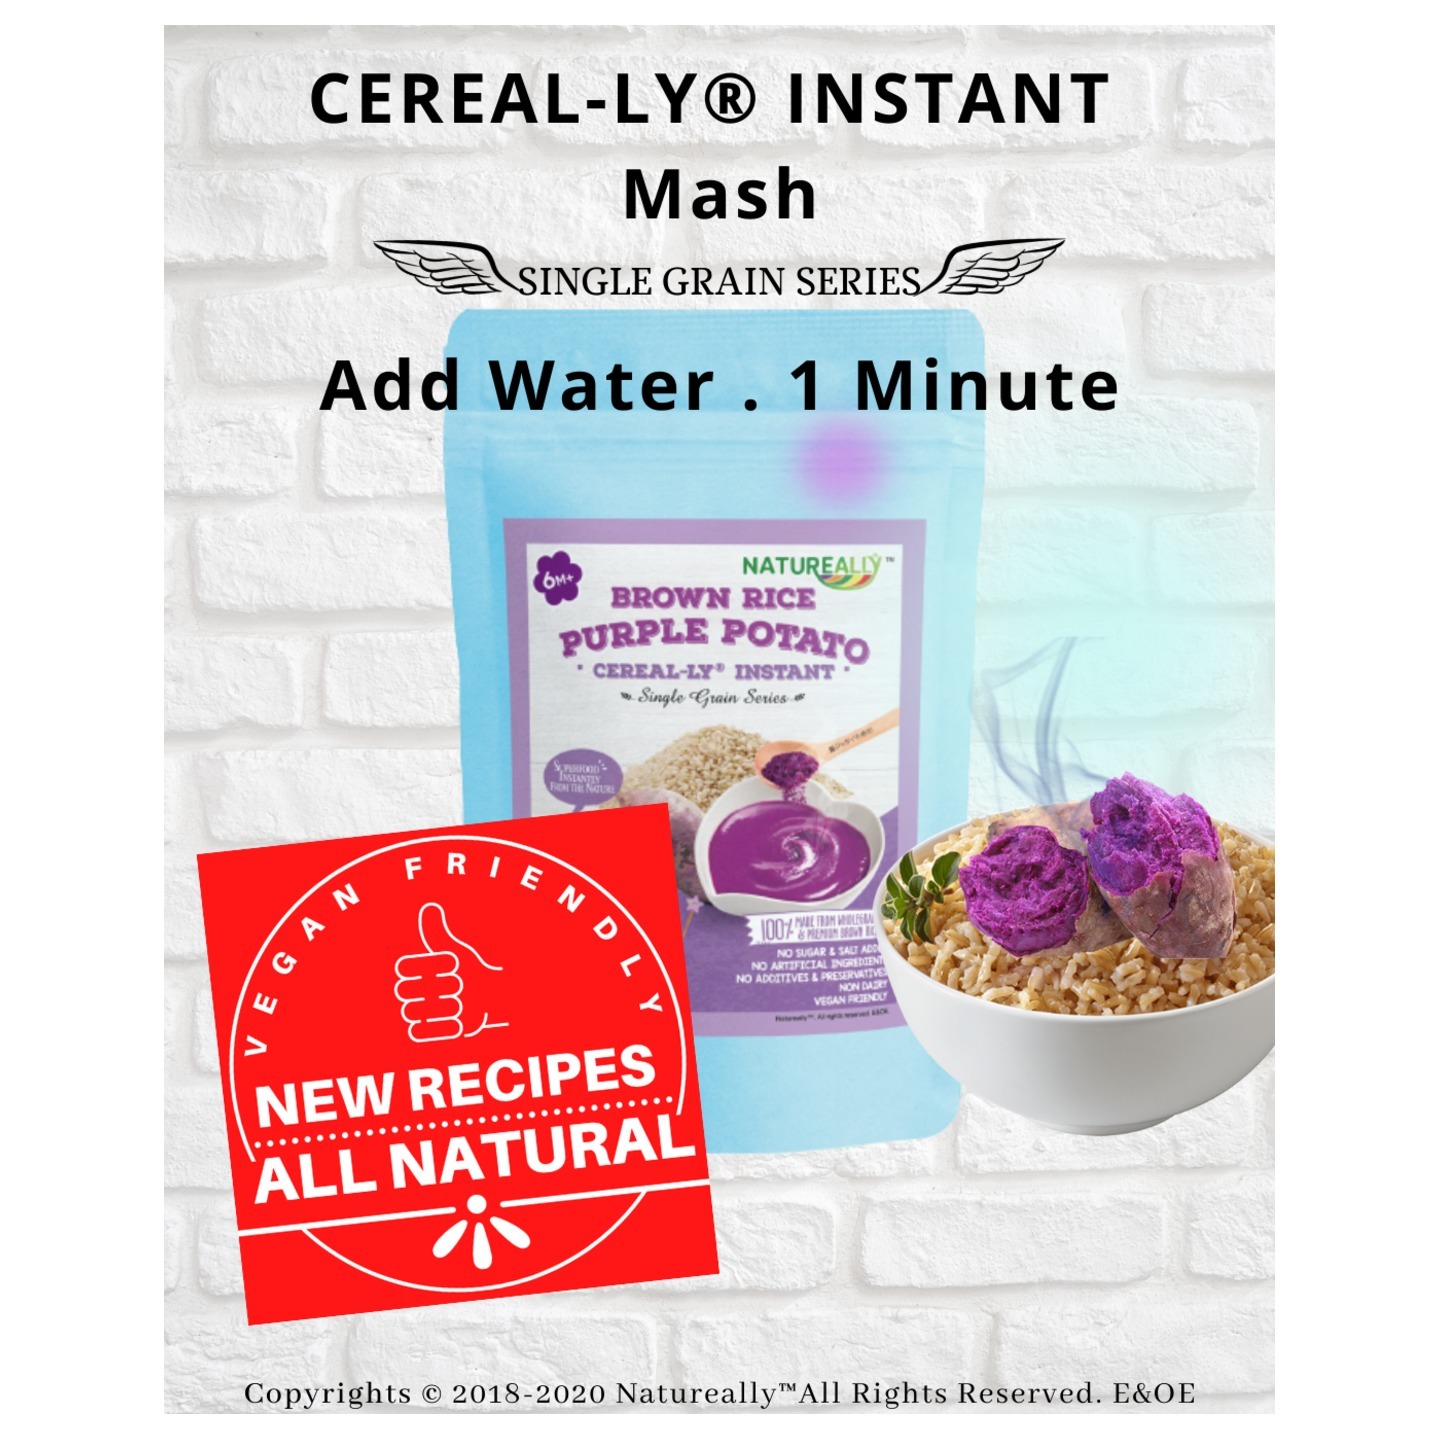 Baby Food Brown Rice Cereal Instant Mash NATUREALLY N0 Sugar No SALT and No MSG Added. Brown Rice Purple Potato CEREAL-LY